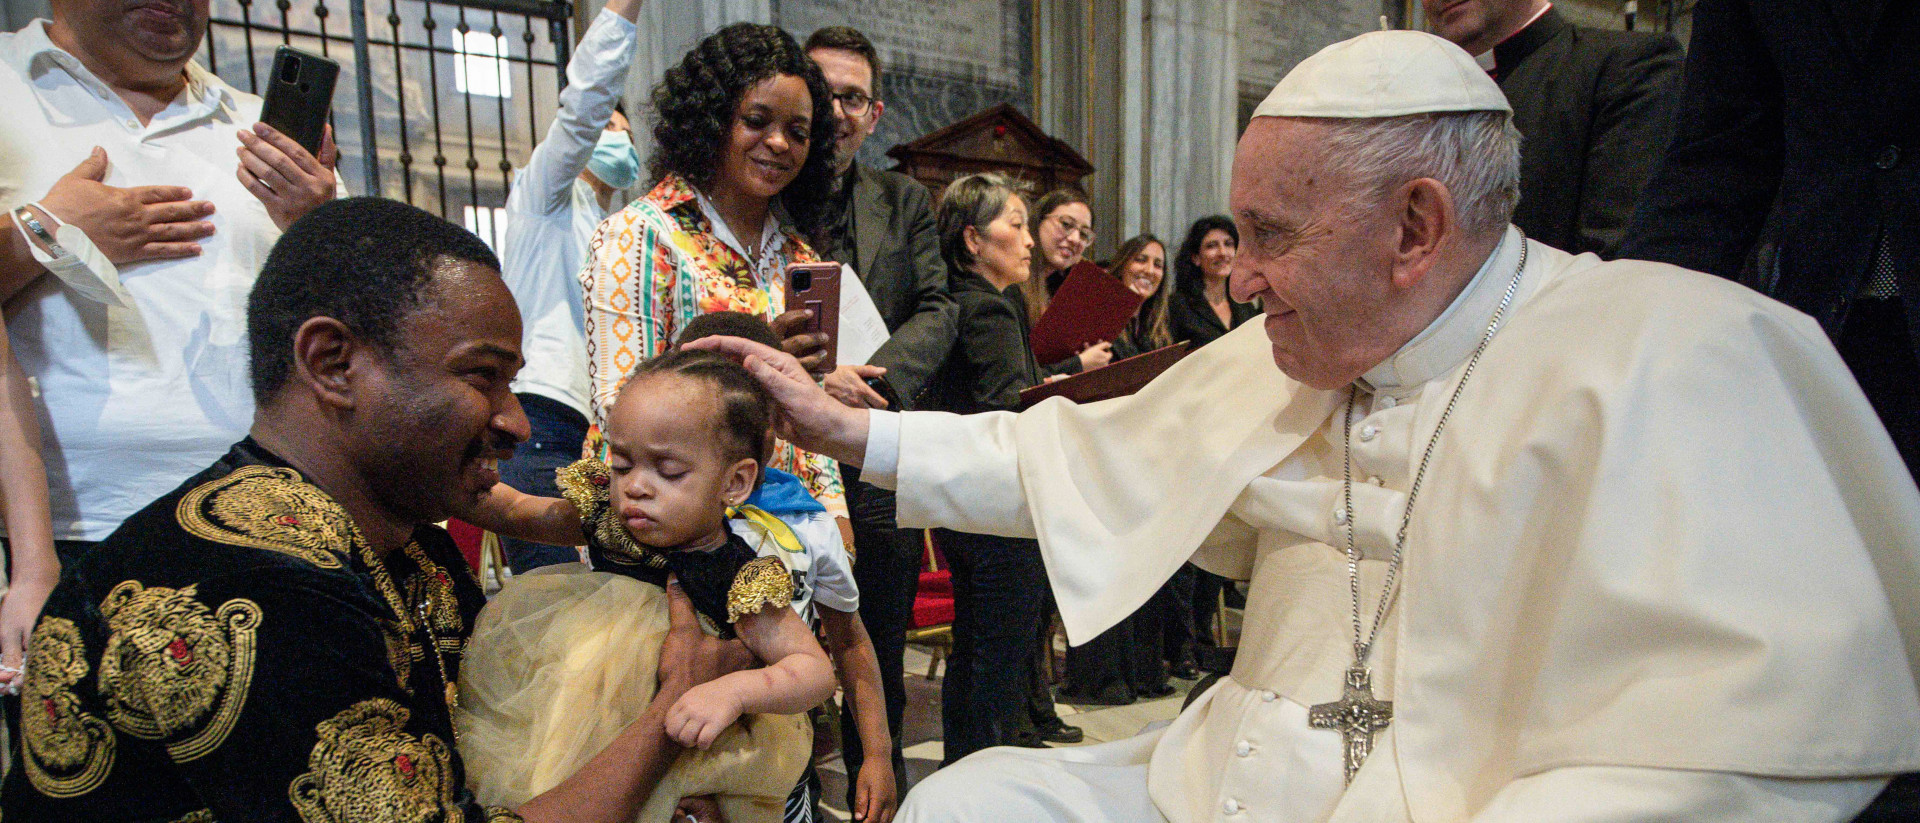 Pope Francis places his hand on the head of a little girl during the worldwide rosary prayer at the Church of Santa Maria Maggiore May 31, 2022 in Rome.